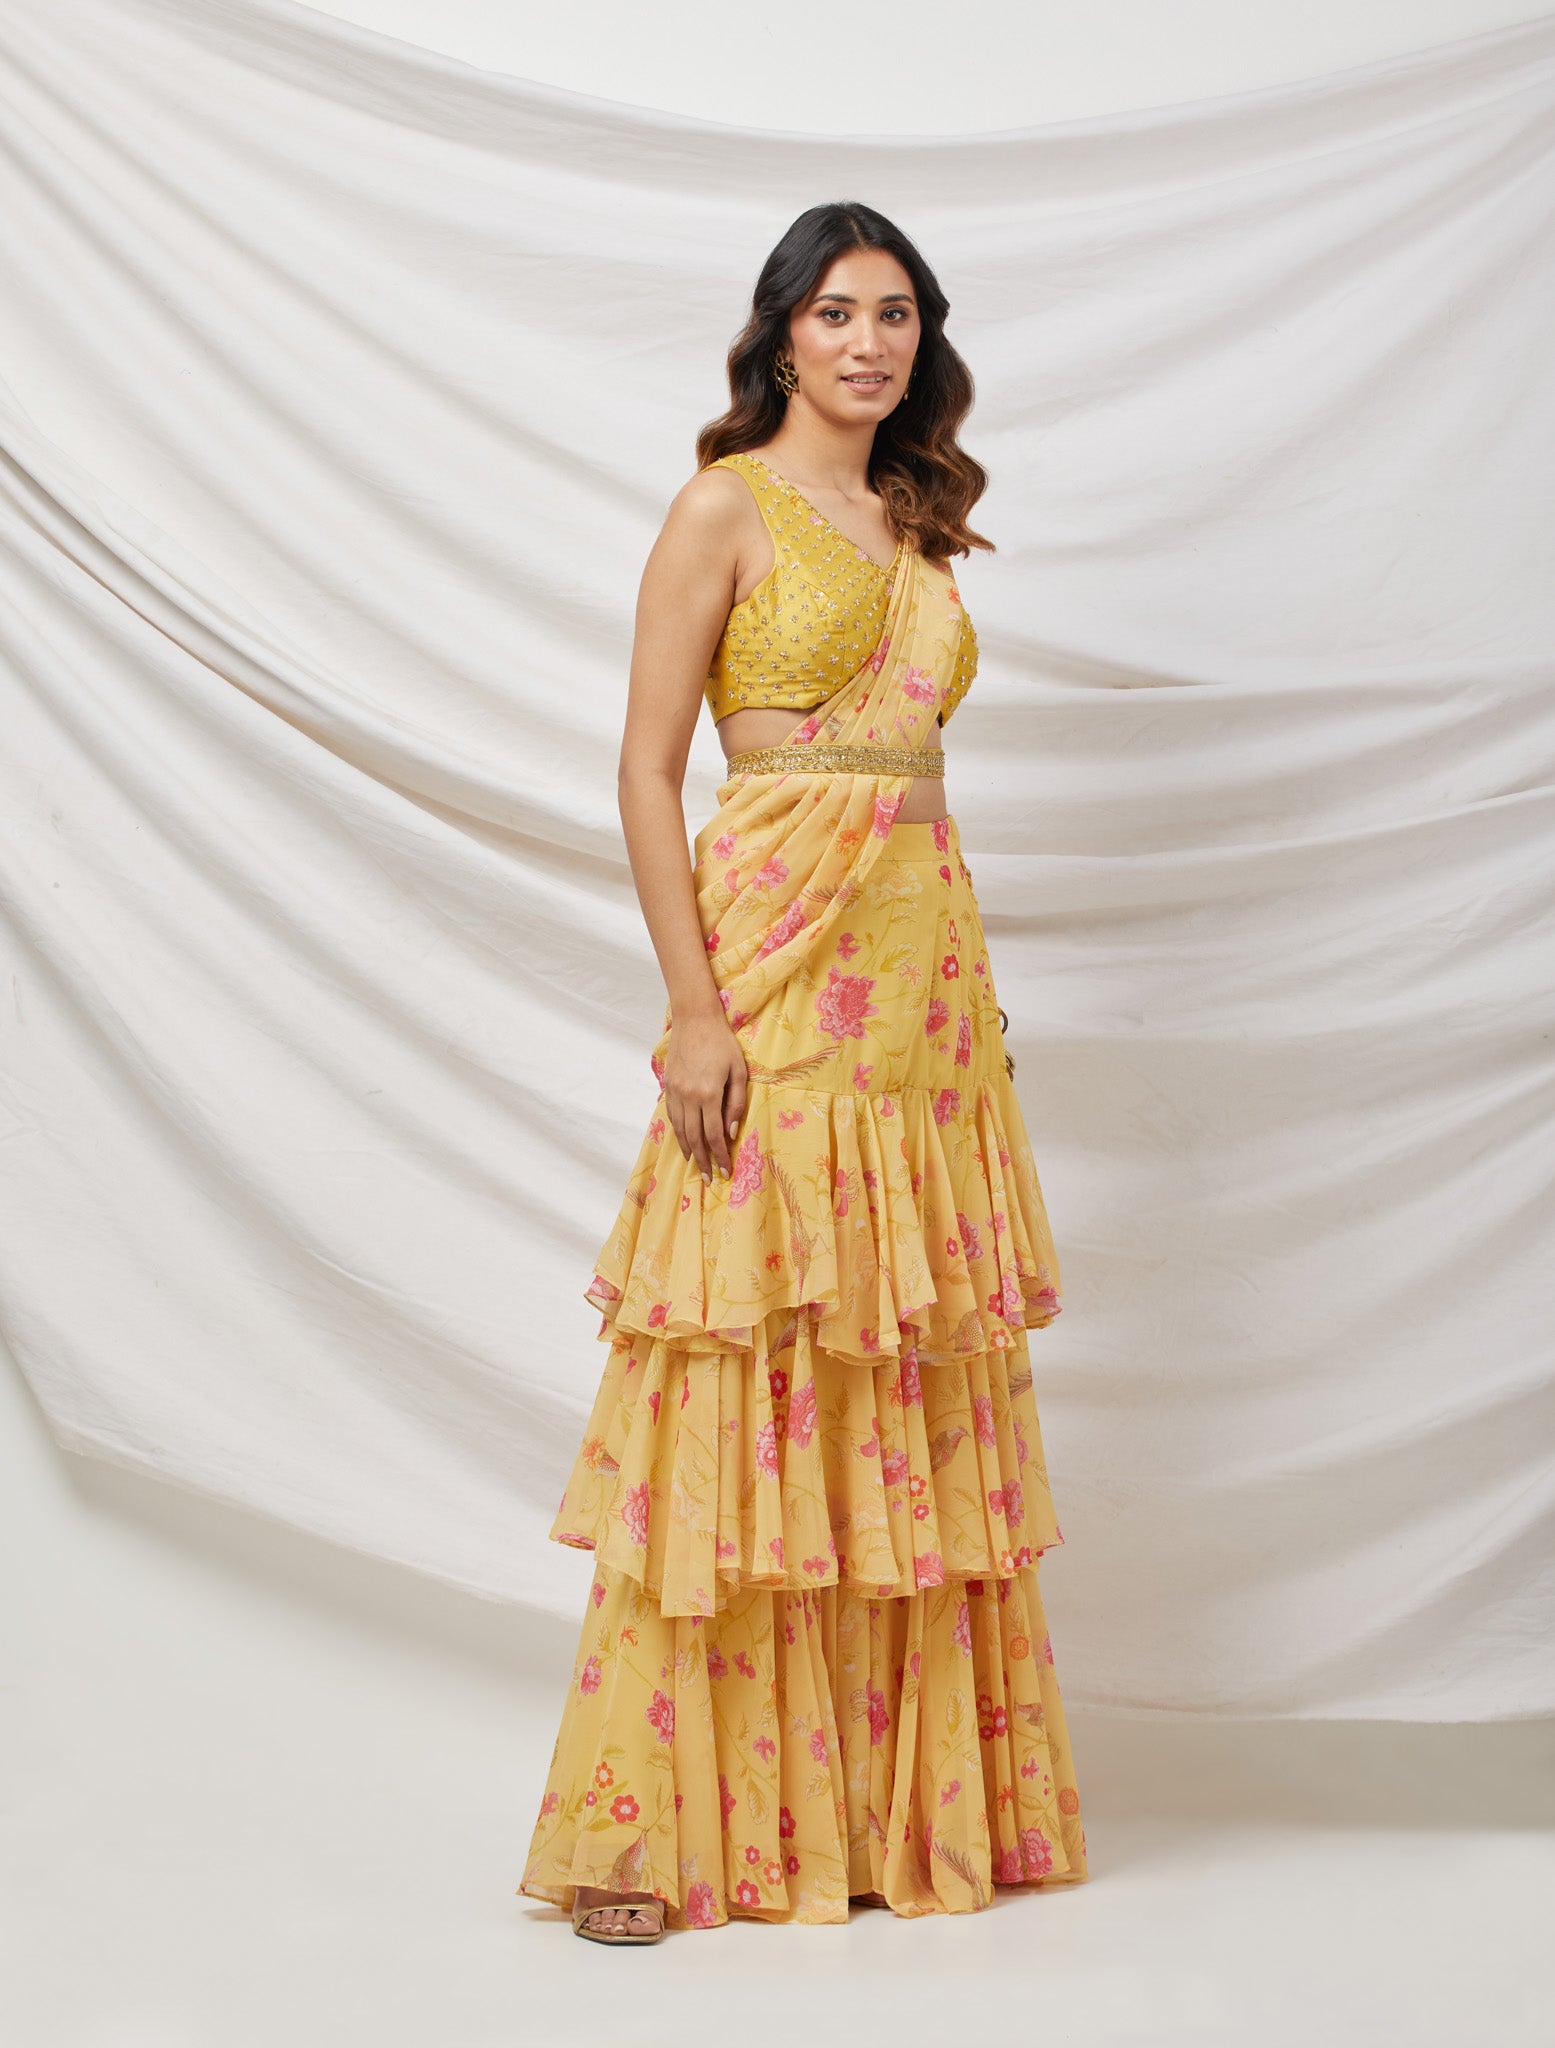 Buy yellow ruffle easy to drape saree set featuring sequins, cut dana, and zari work. Dazzle on weddings and special occasions with exquisite Indian designer dresses, sharara suits, Anarkali suits, and wedding lehengas from Pure Elegance Indian fashion store in the USA.